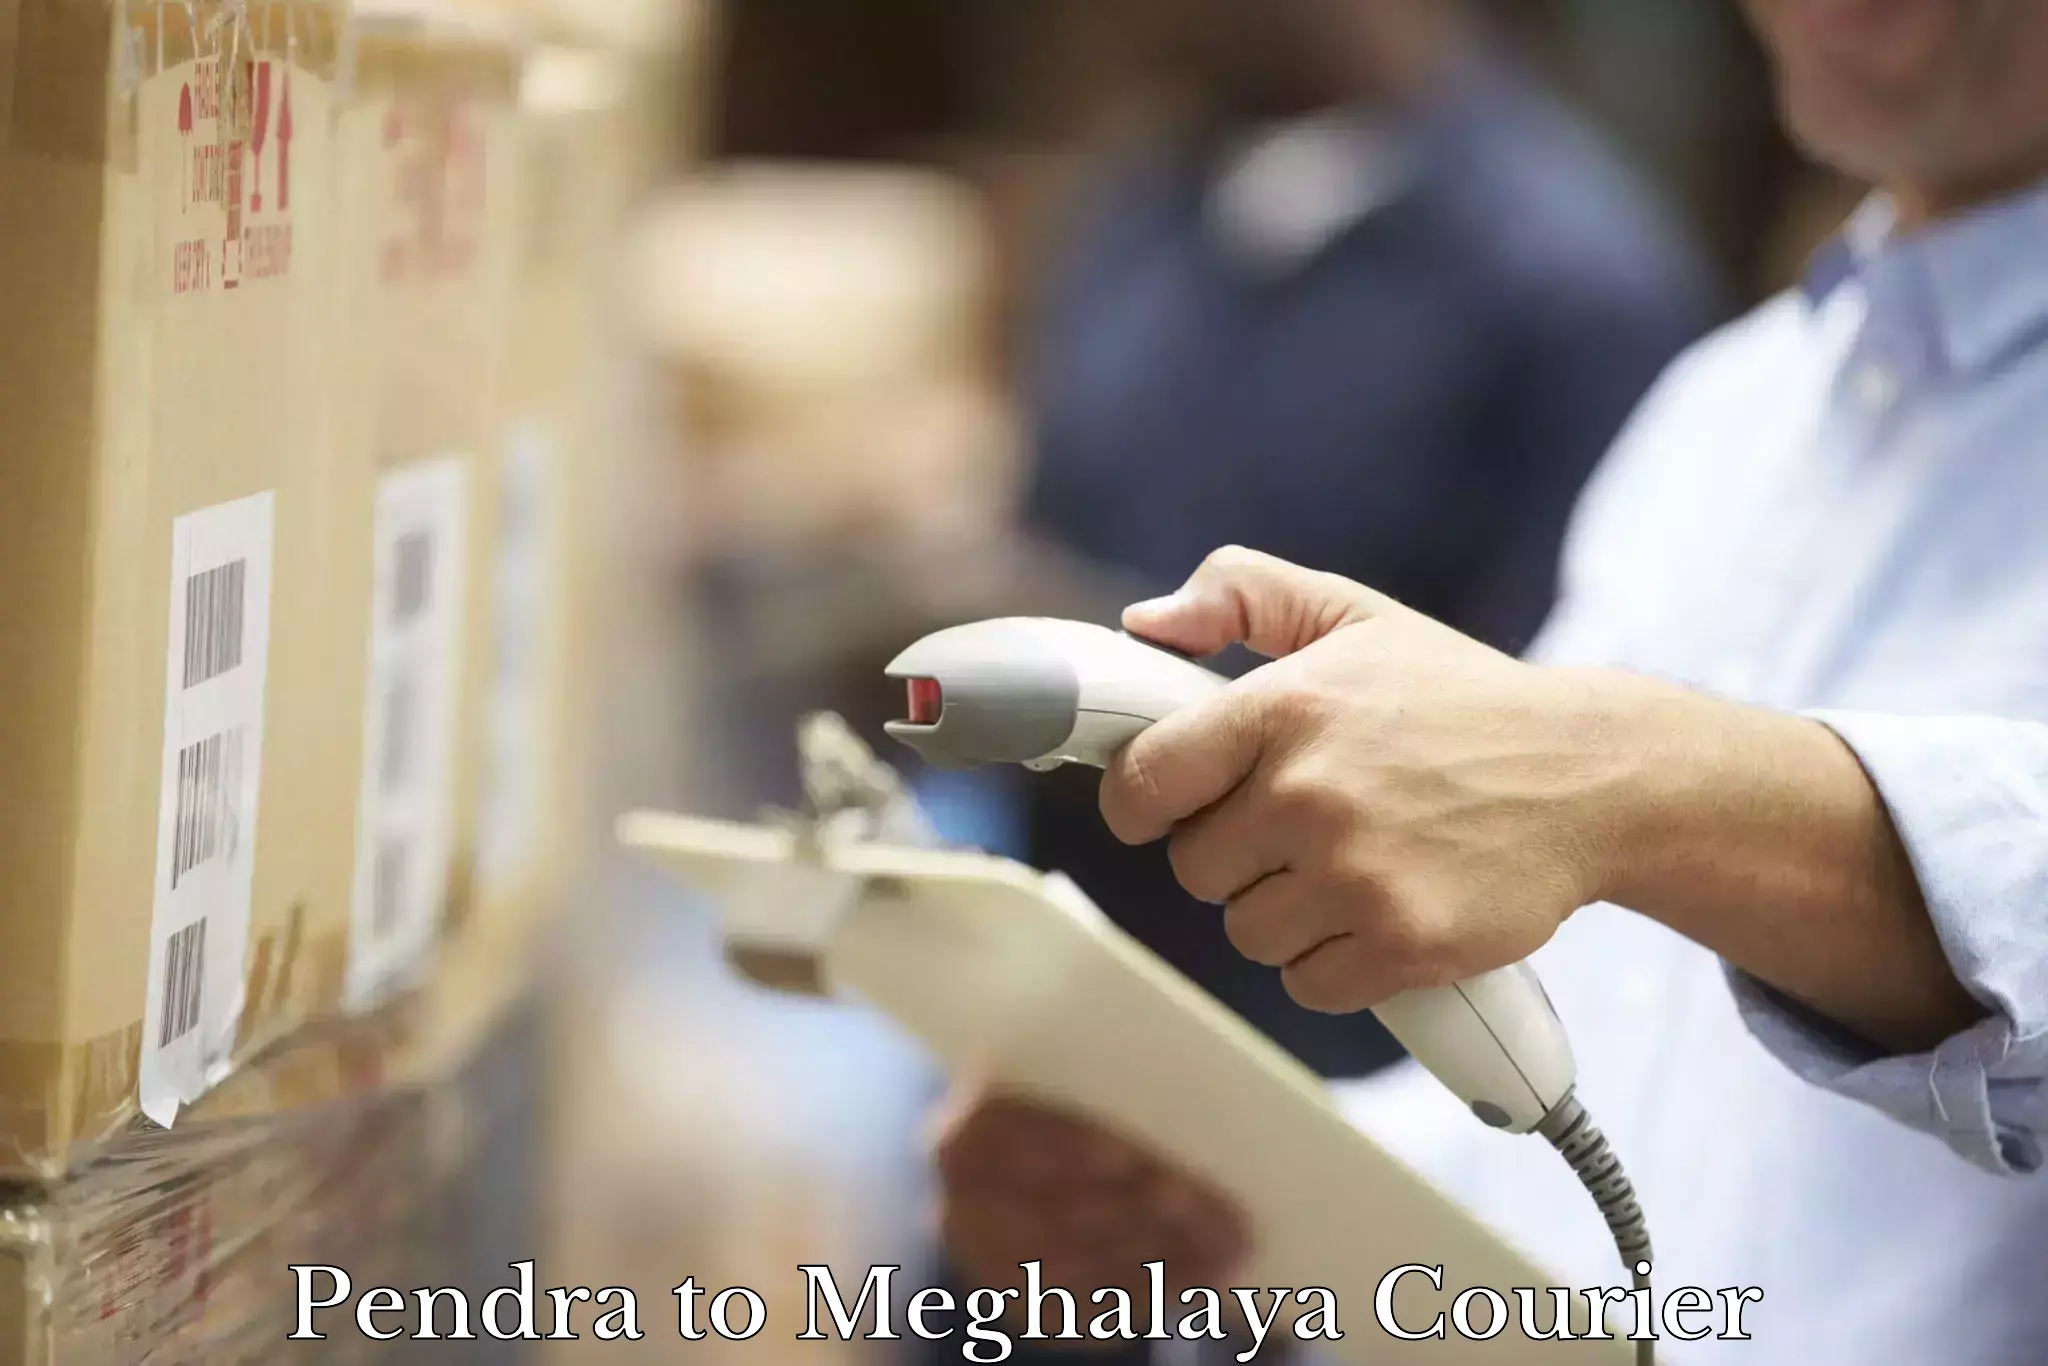 Efficient order fulfillment Pendra to Dkhiah West